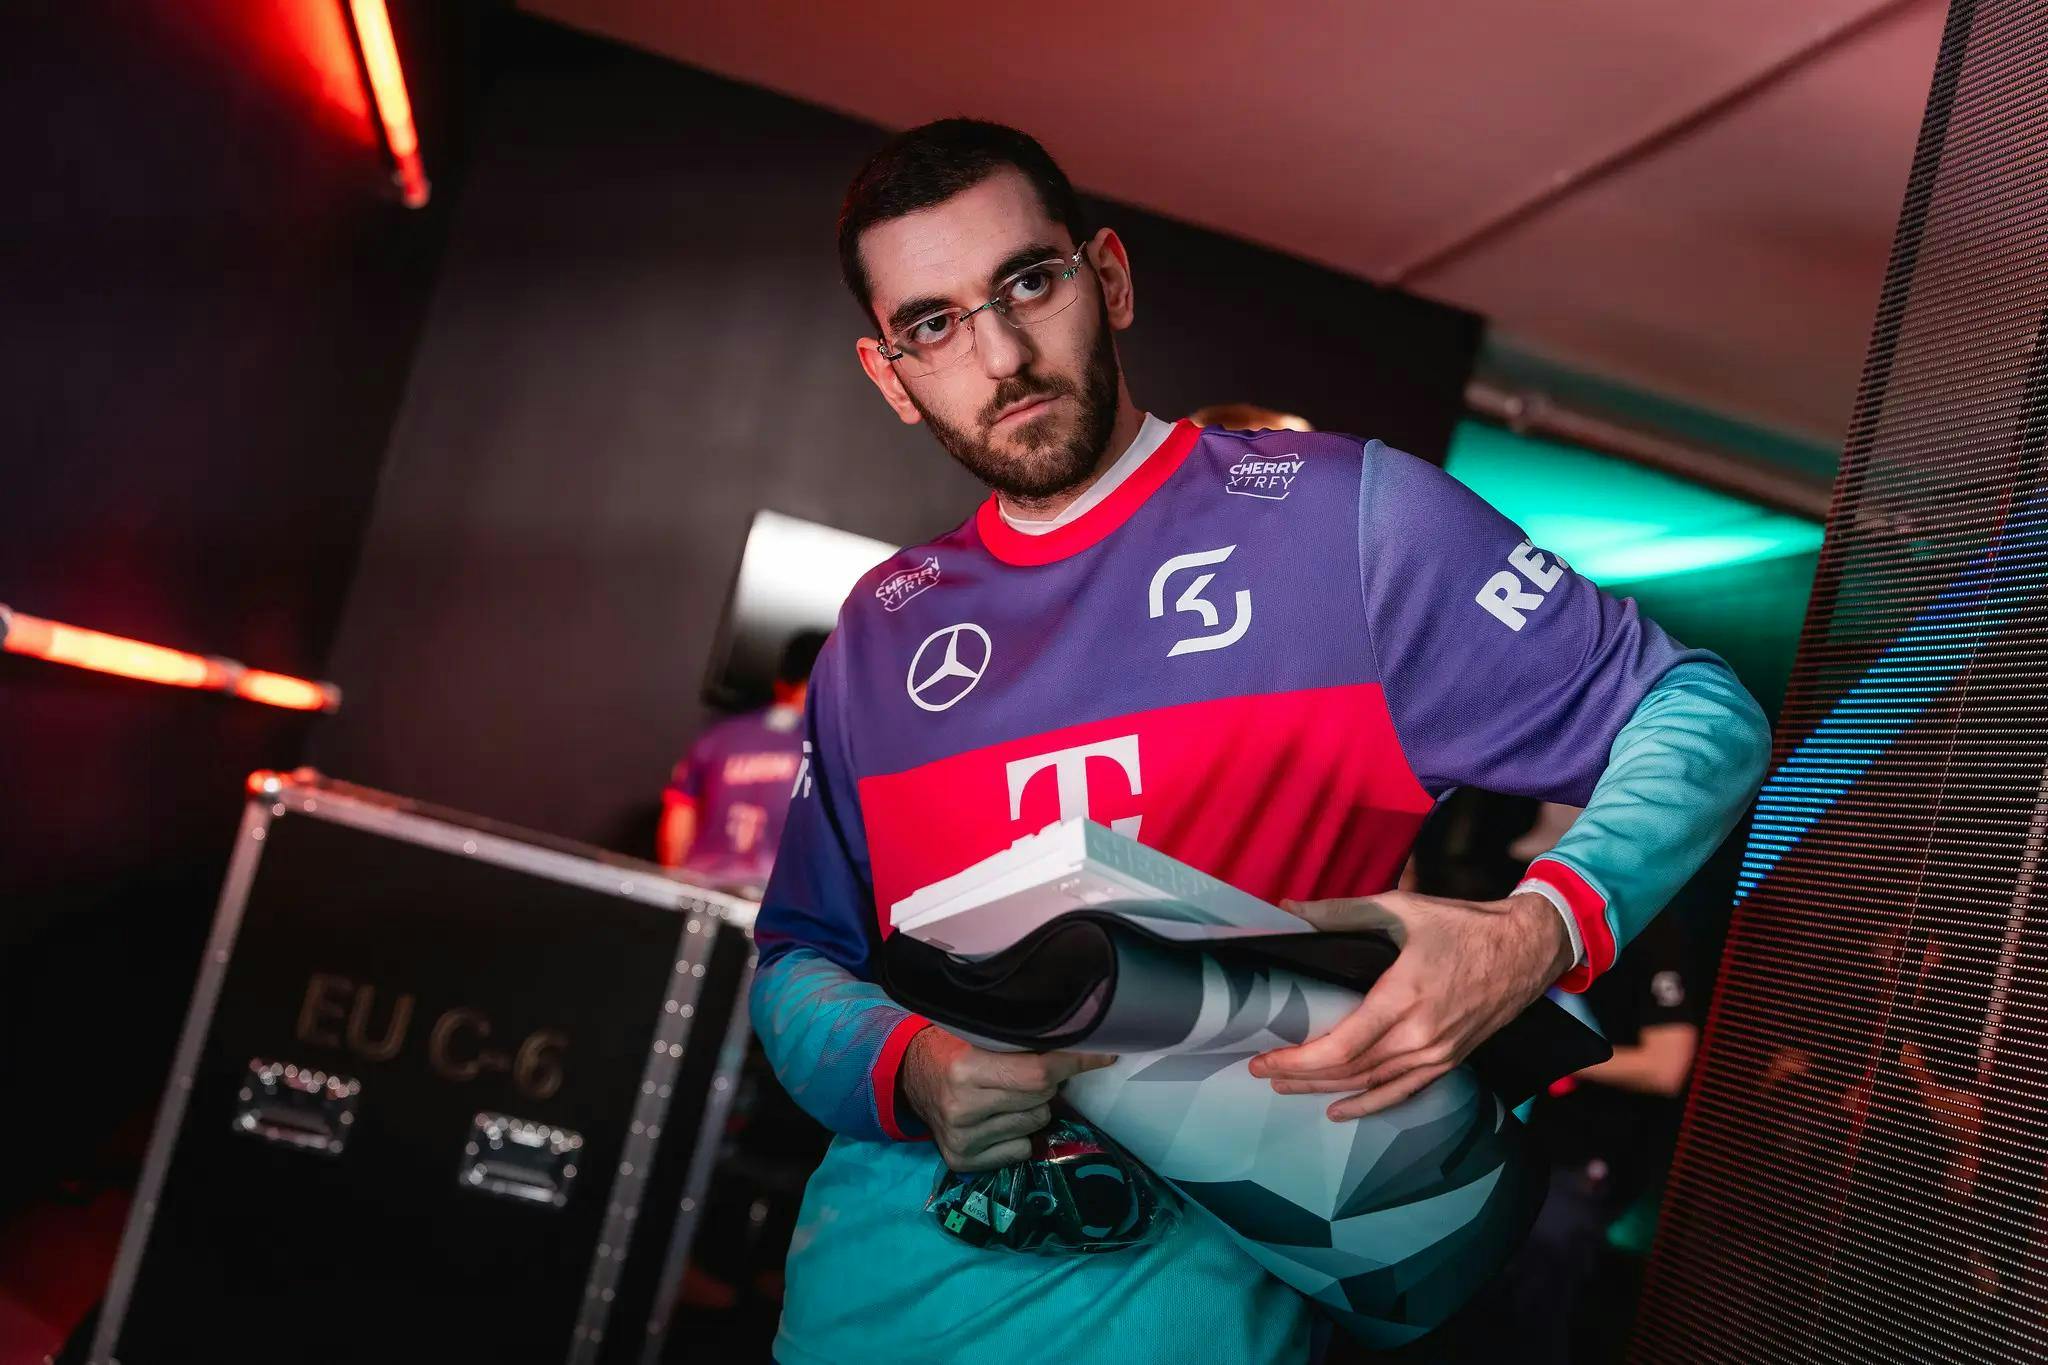 Nisqy preparing to get on stage for the LEC. Credit: Wojciech Wandzel/Riot Games